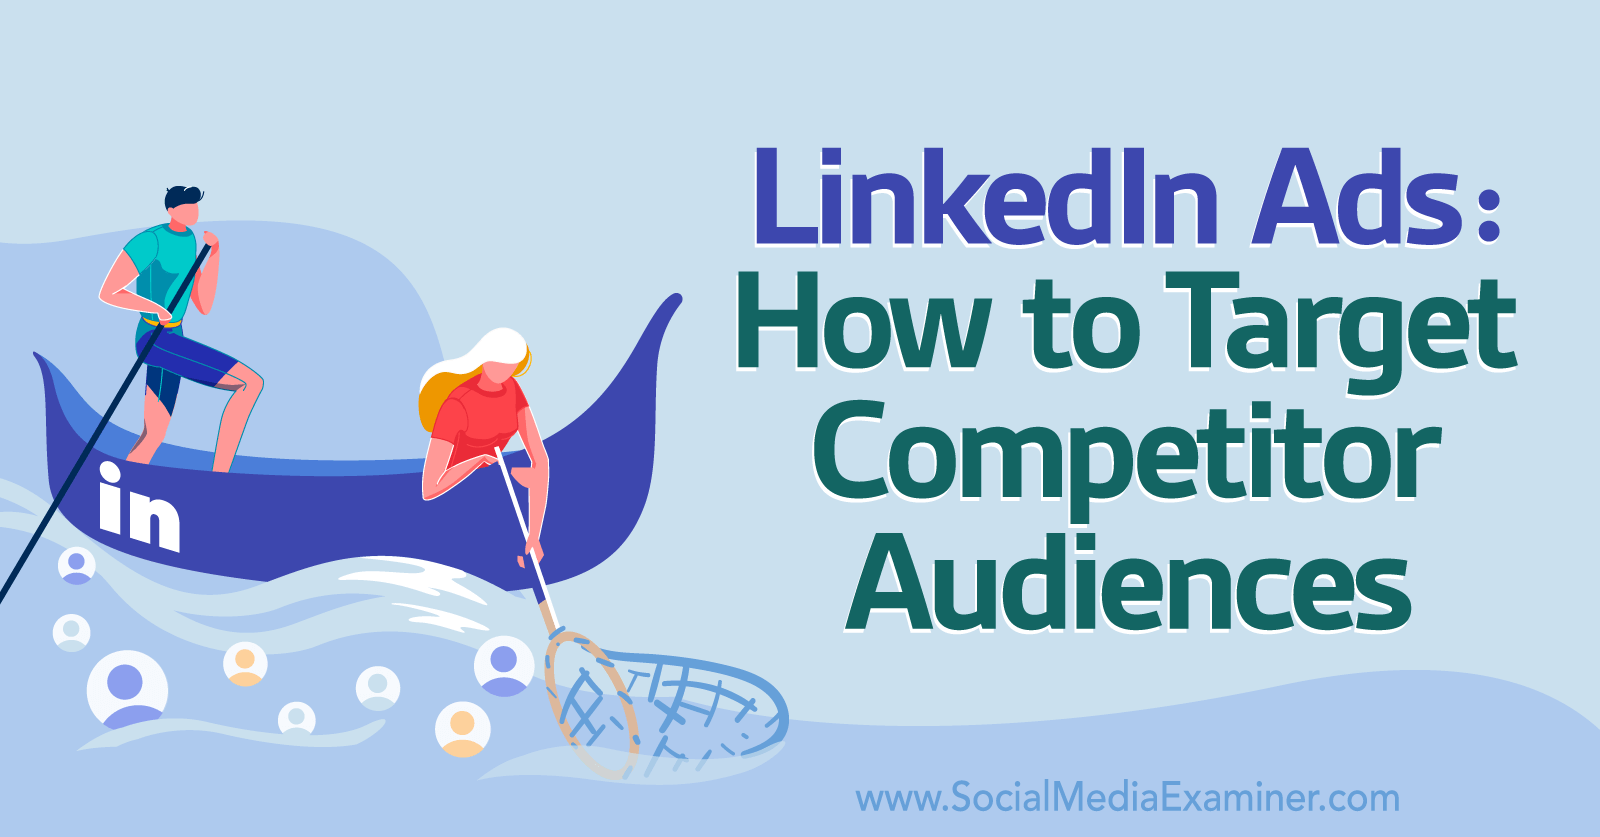 LinkedIn Ads: How to Target Competitor Audiences-Social Media Examiner